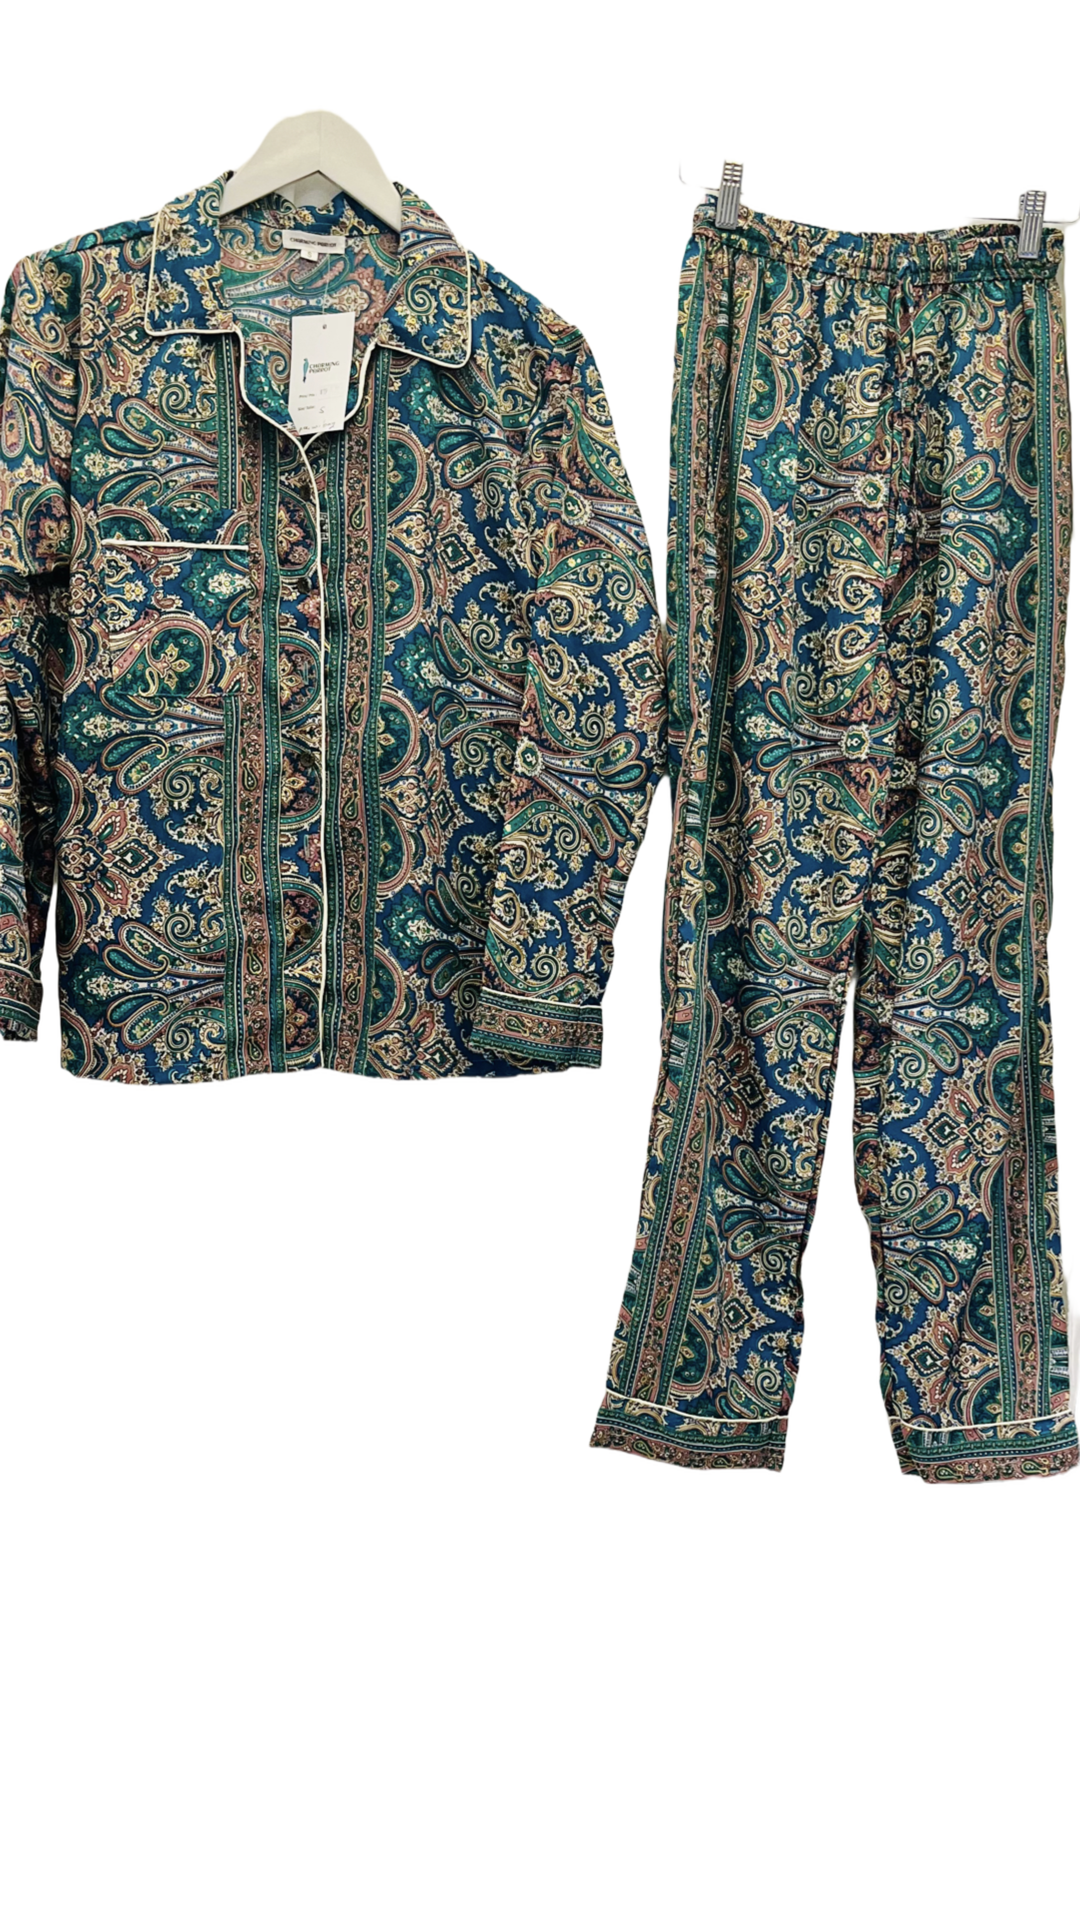 Lucca 2 piece blue silk pajama Sets with matching bag